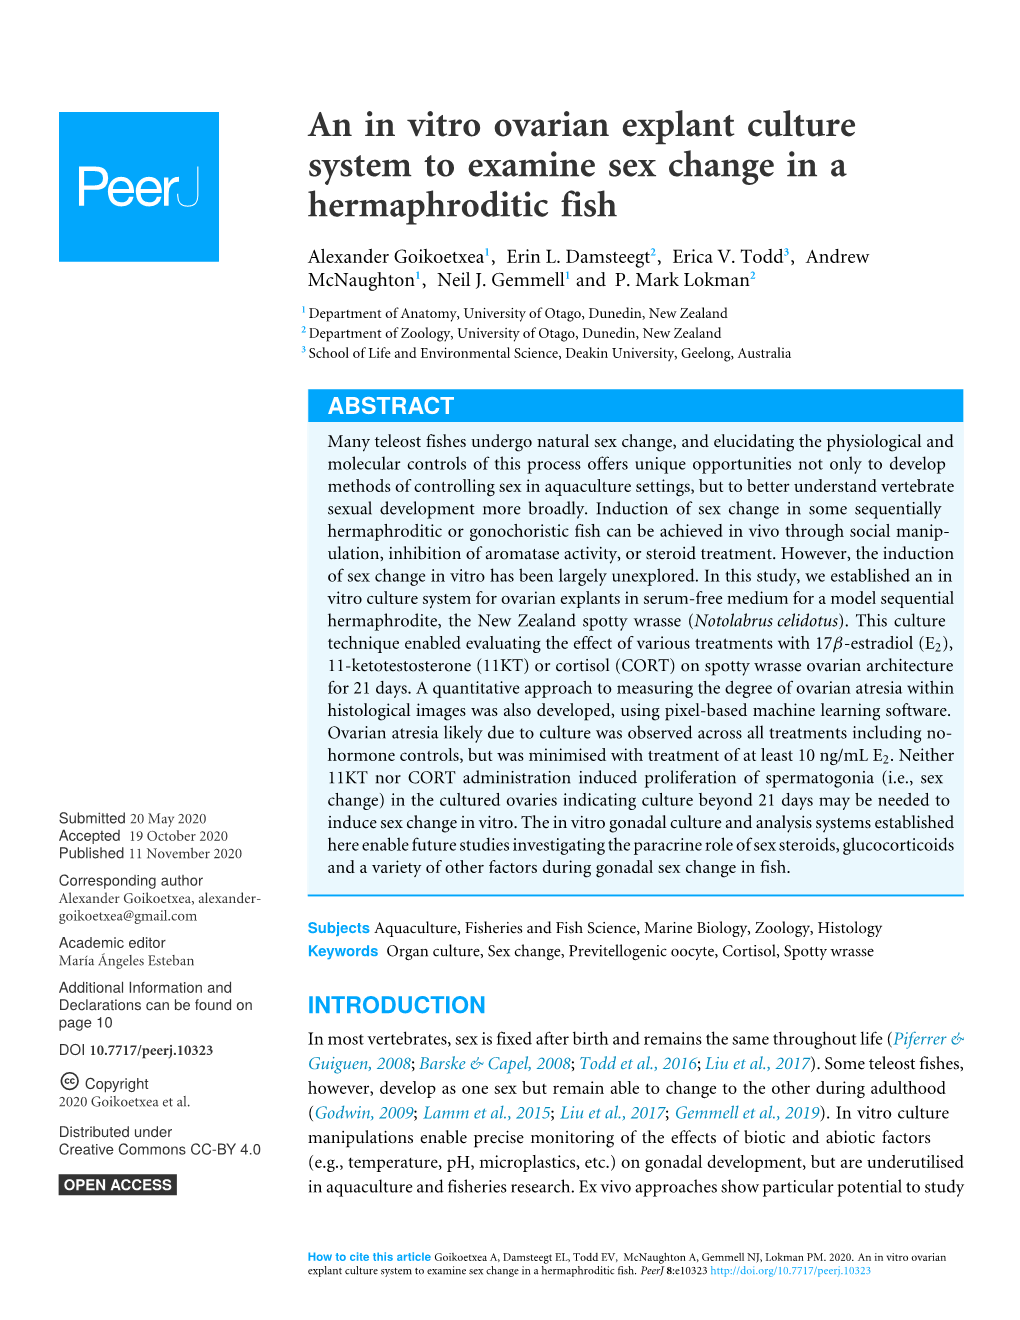 An in Vitro Ovarian Explant Culture System to Examine Sex Change in a Hermaphroditic Fish